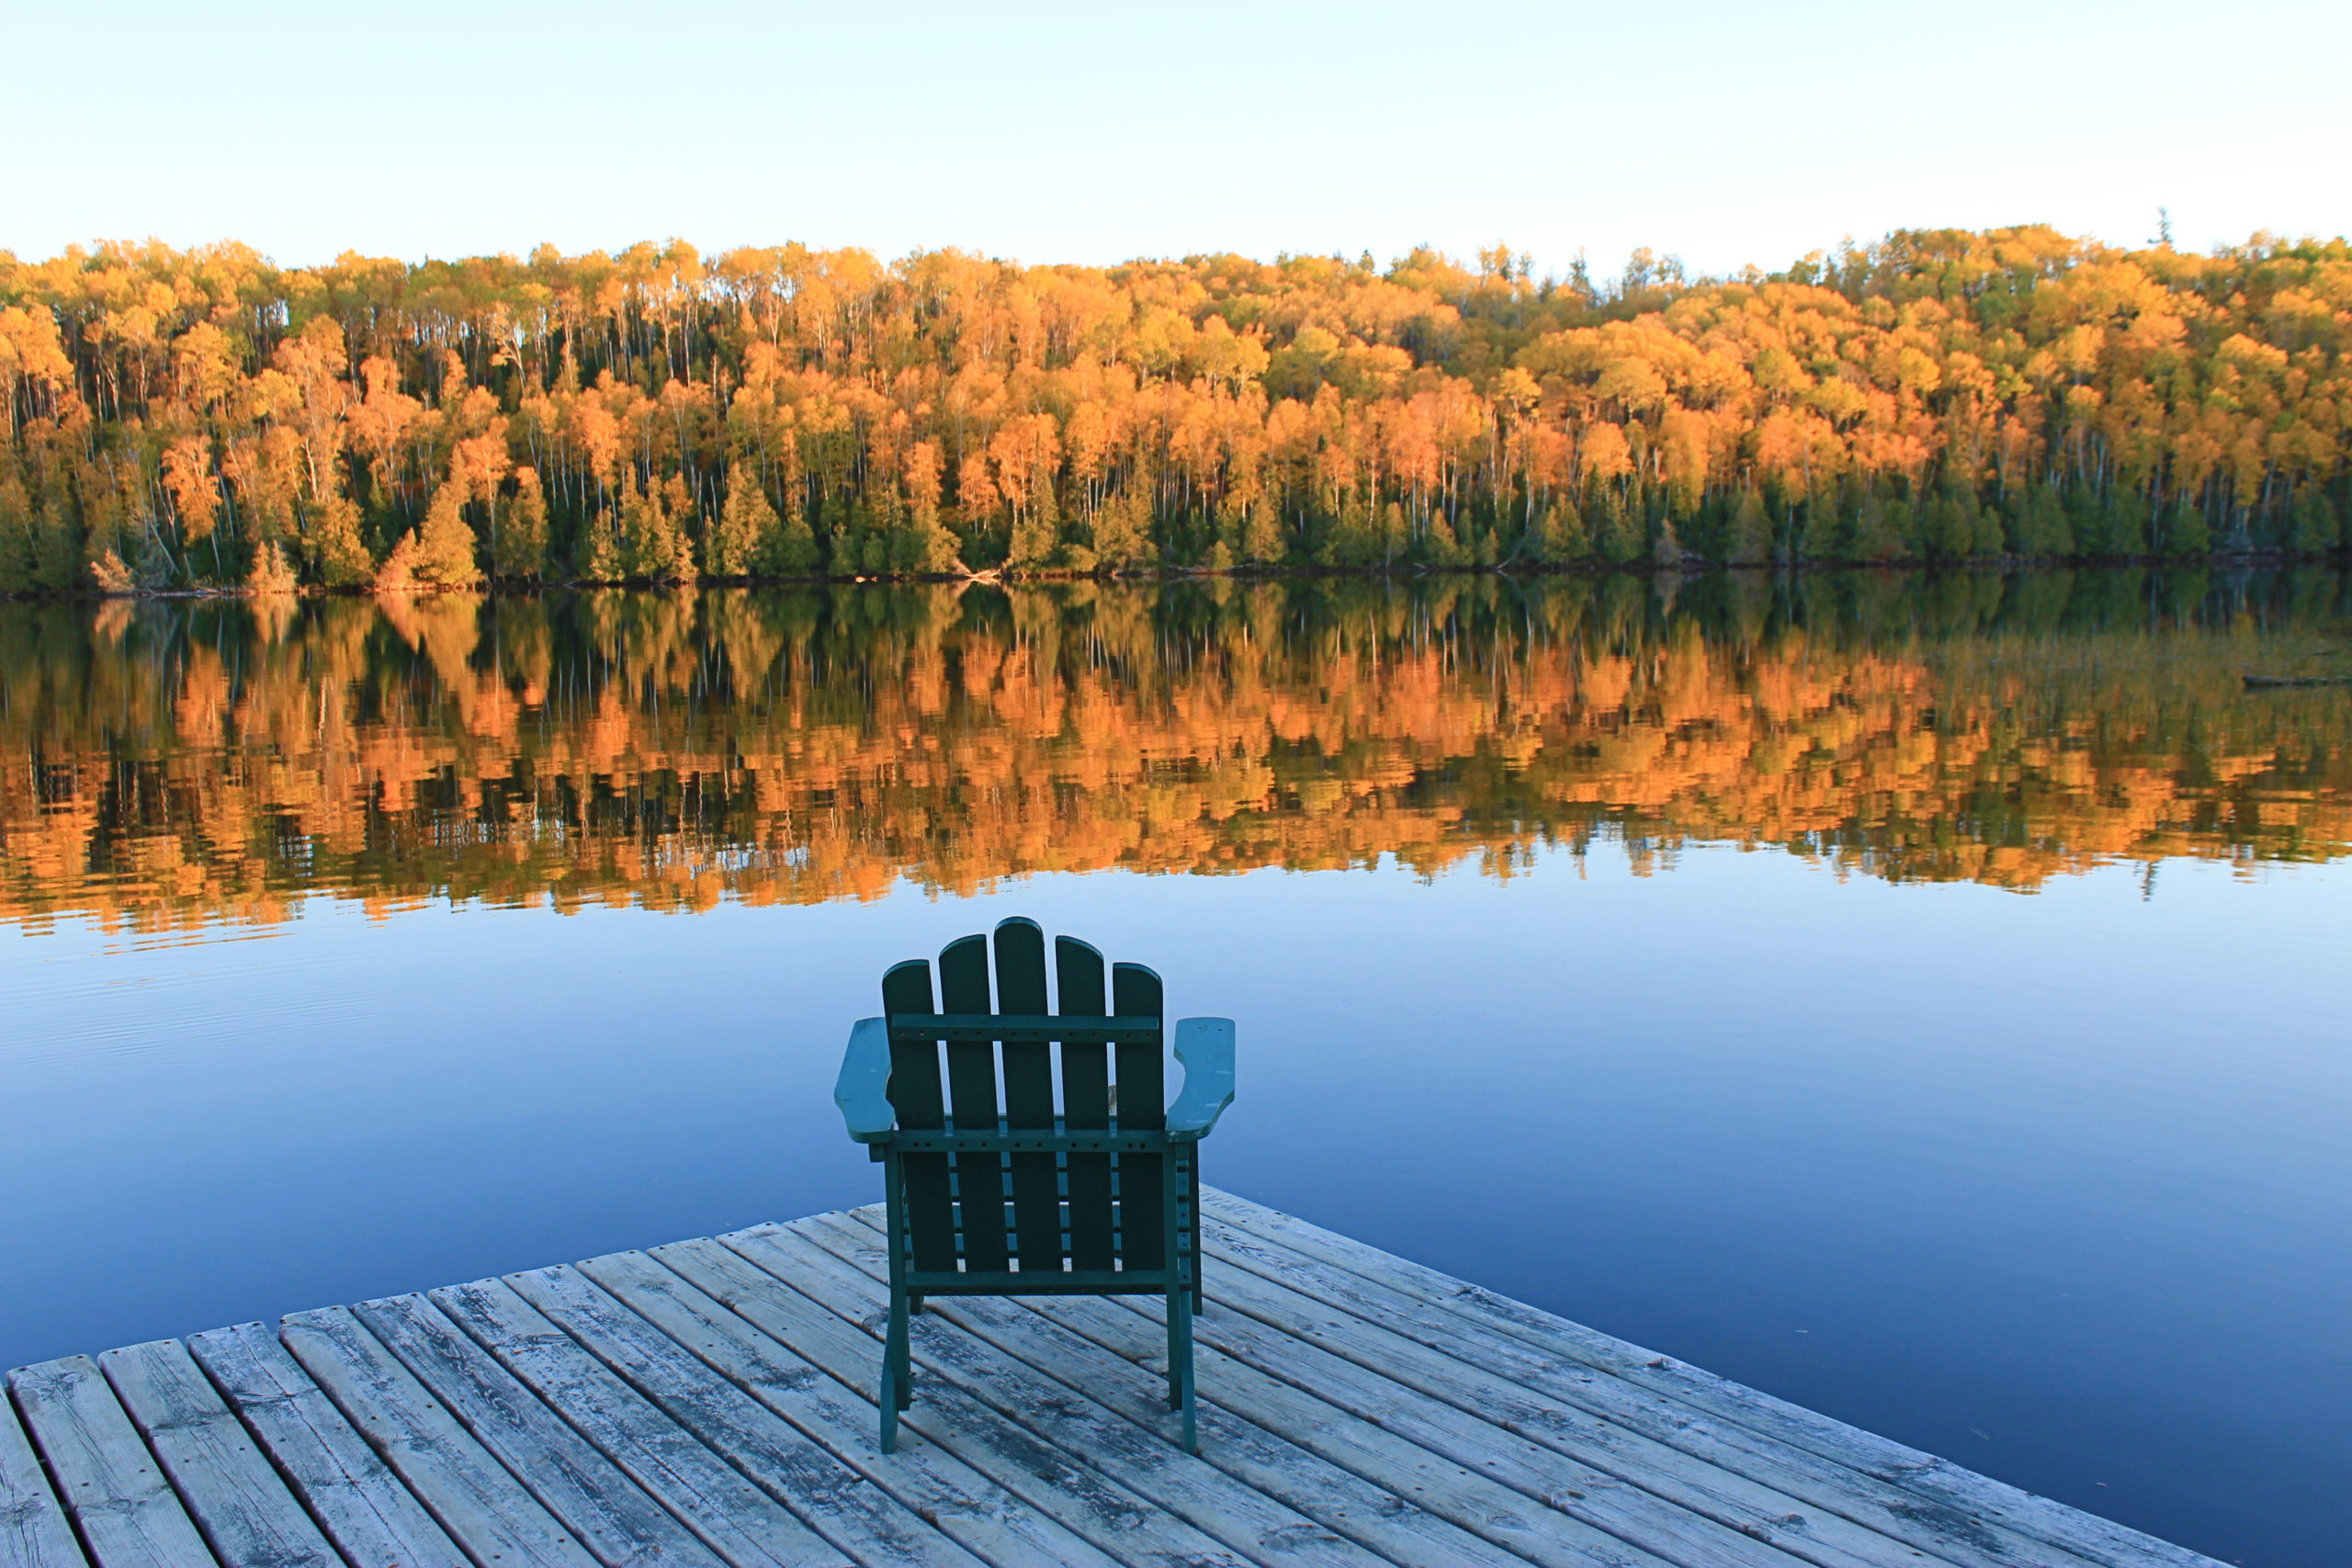 Deck chair sitting on dock overlooking green lake with forest in background